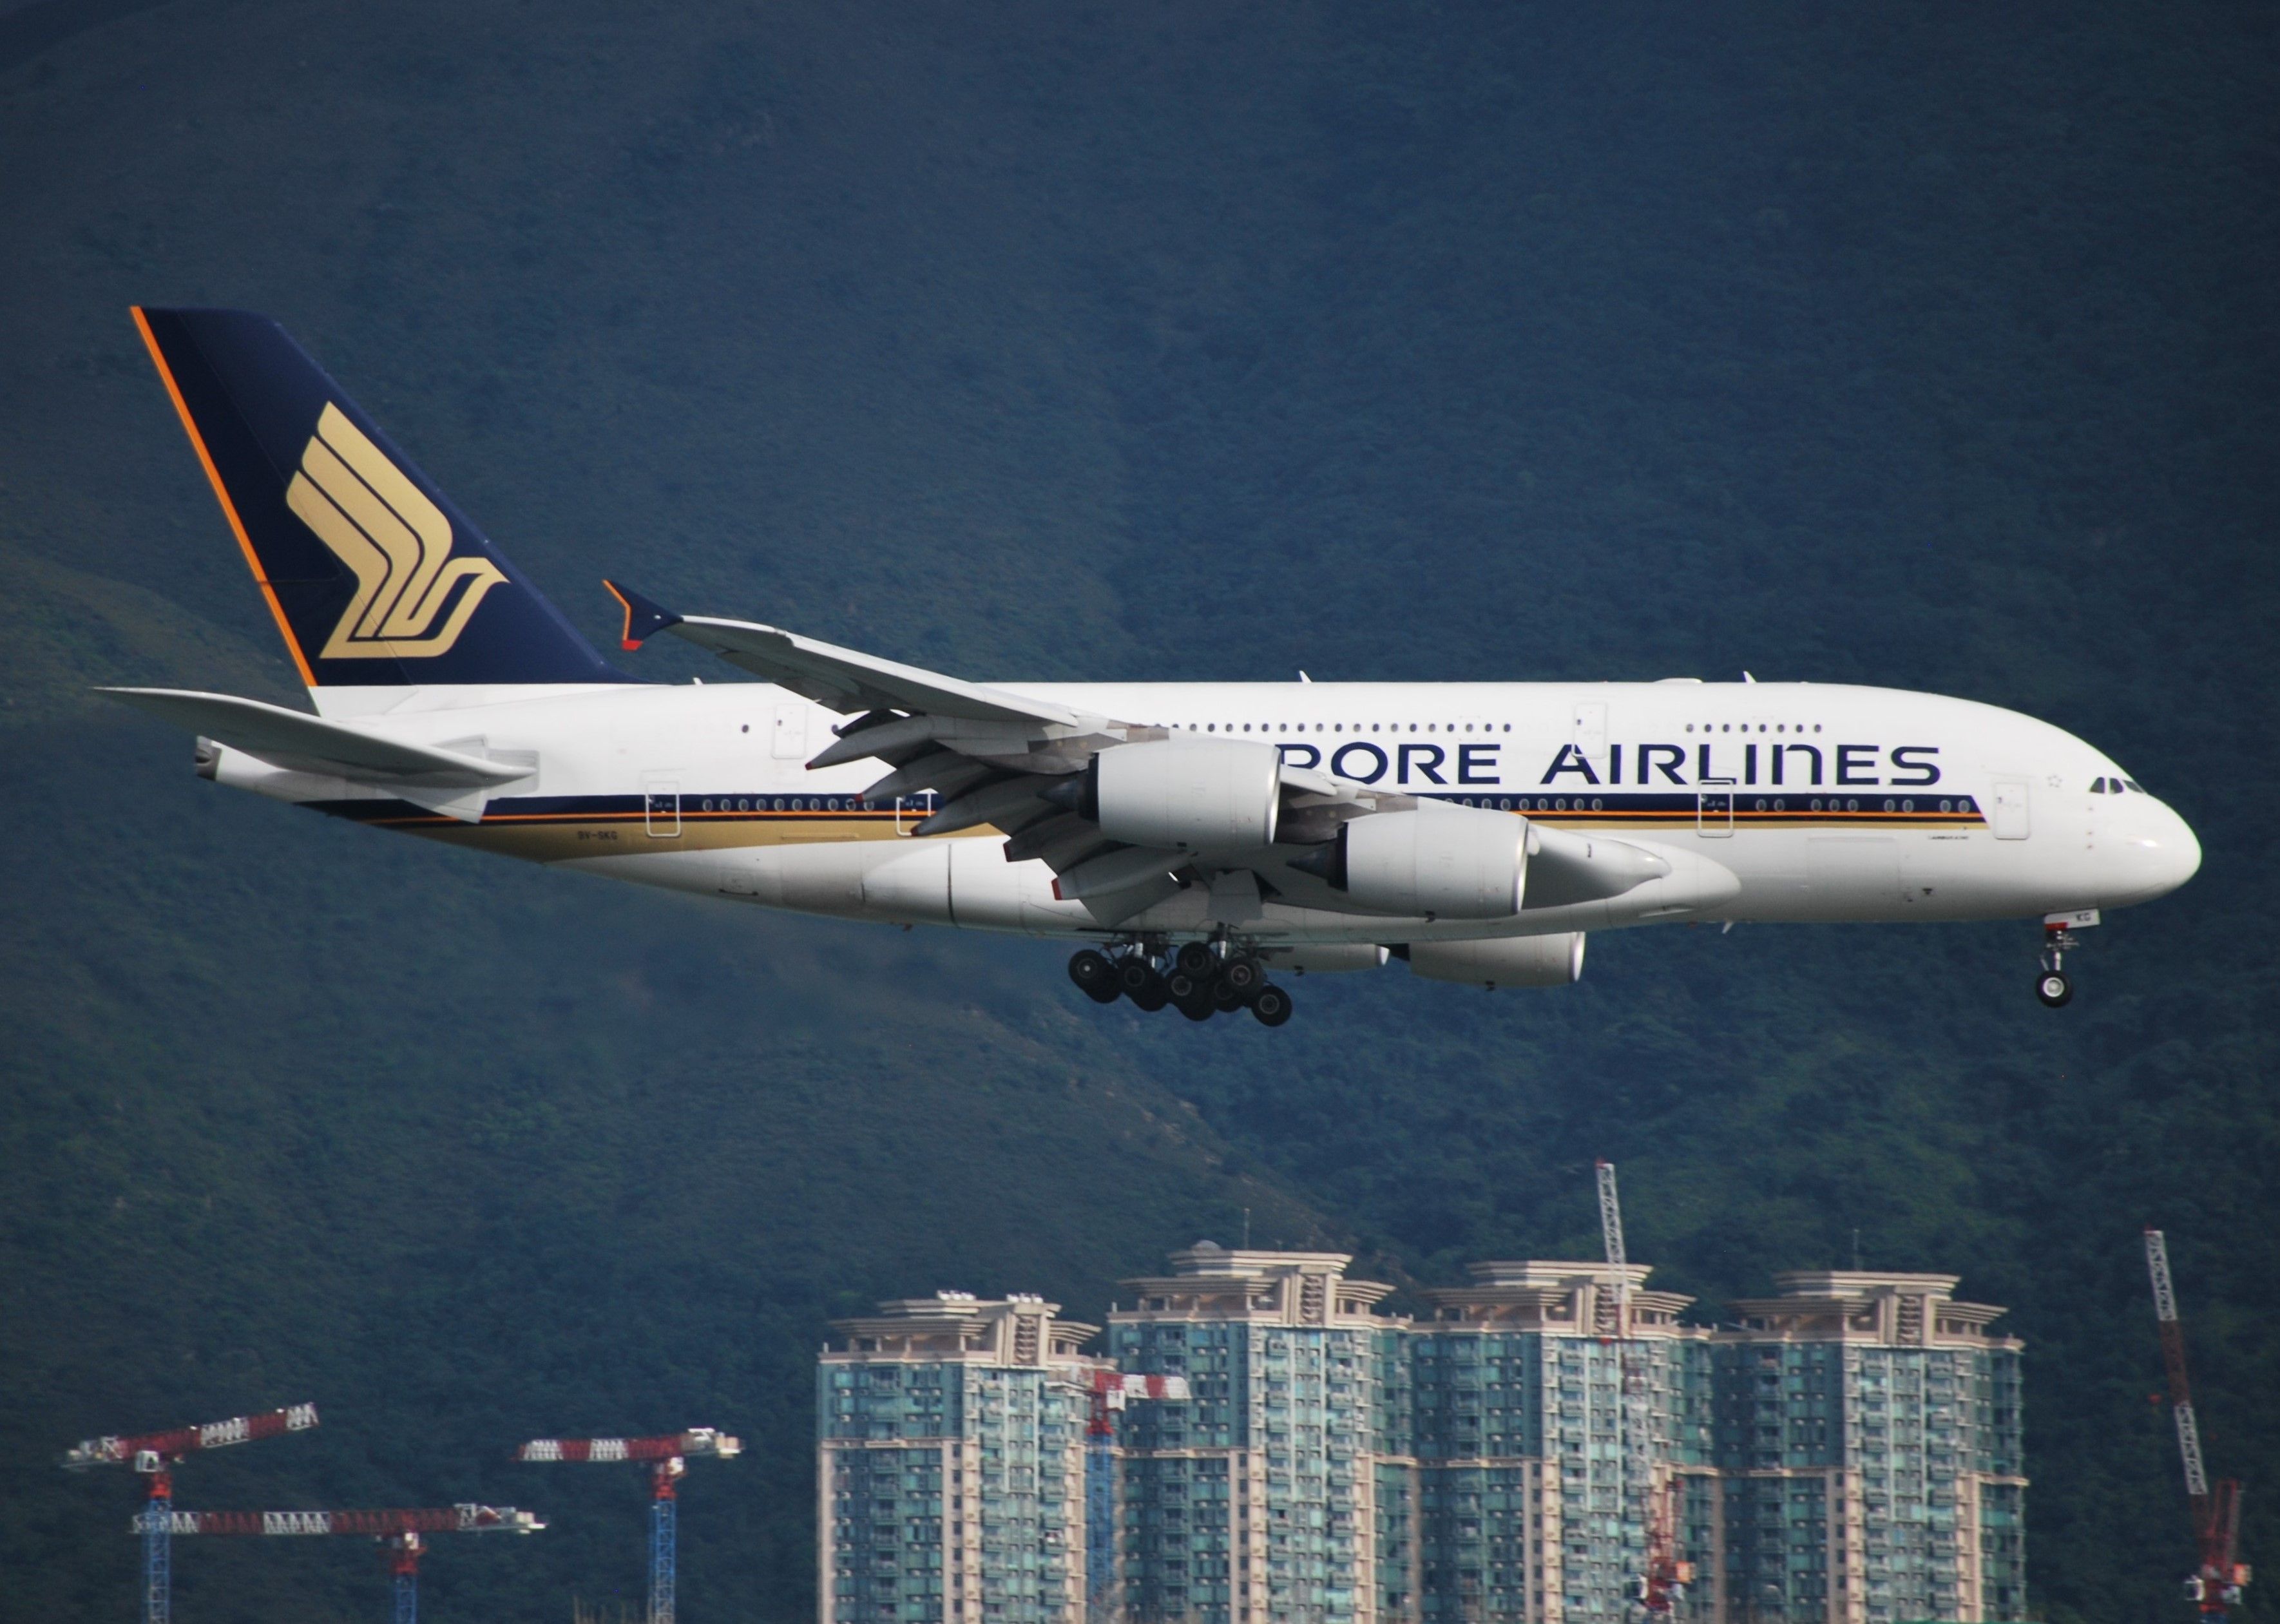 A Singapore Airlines Airbus A380 flying near Hong Kong Airport.